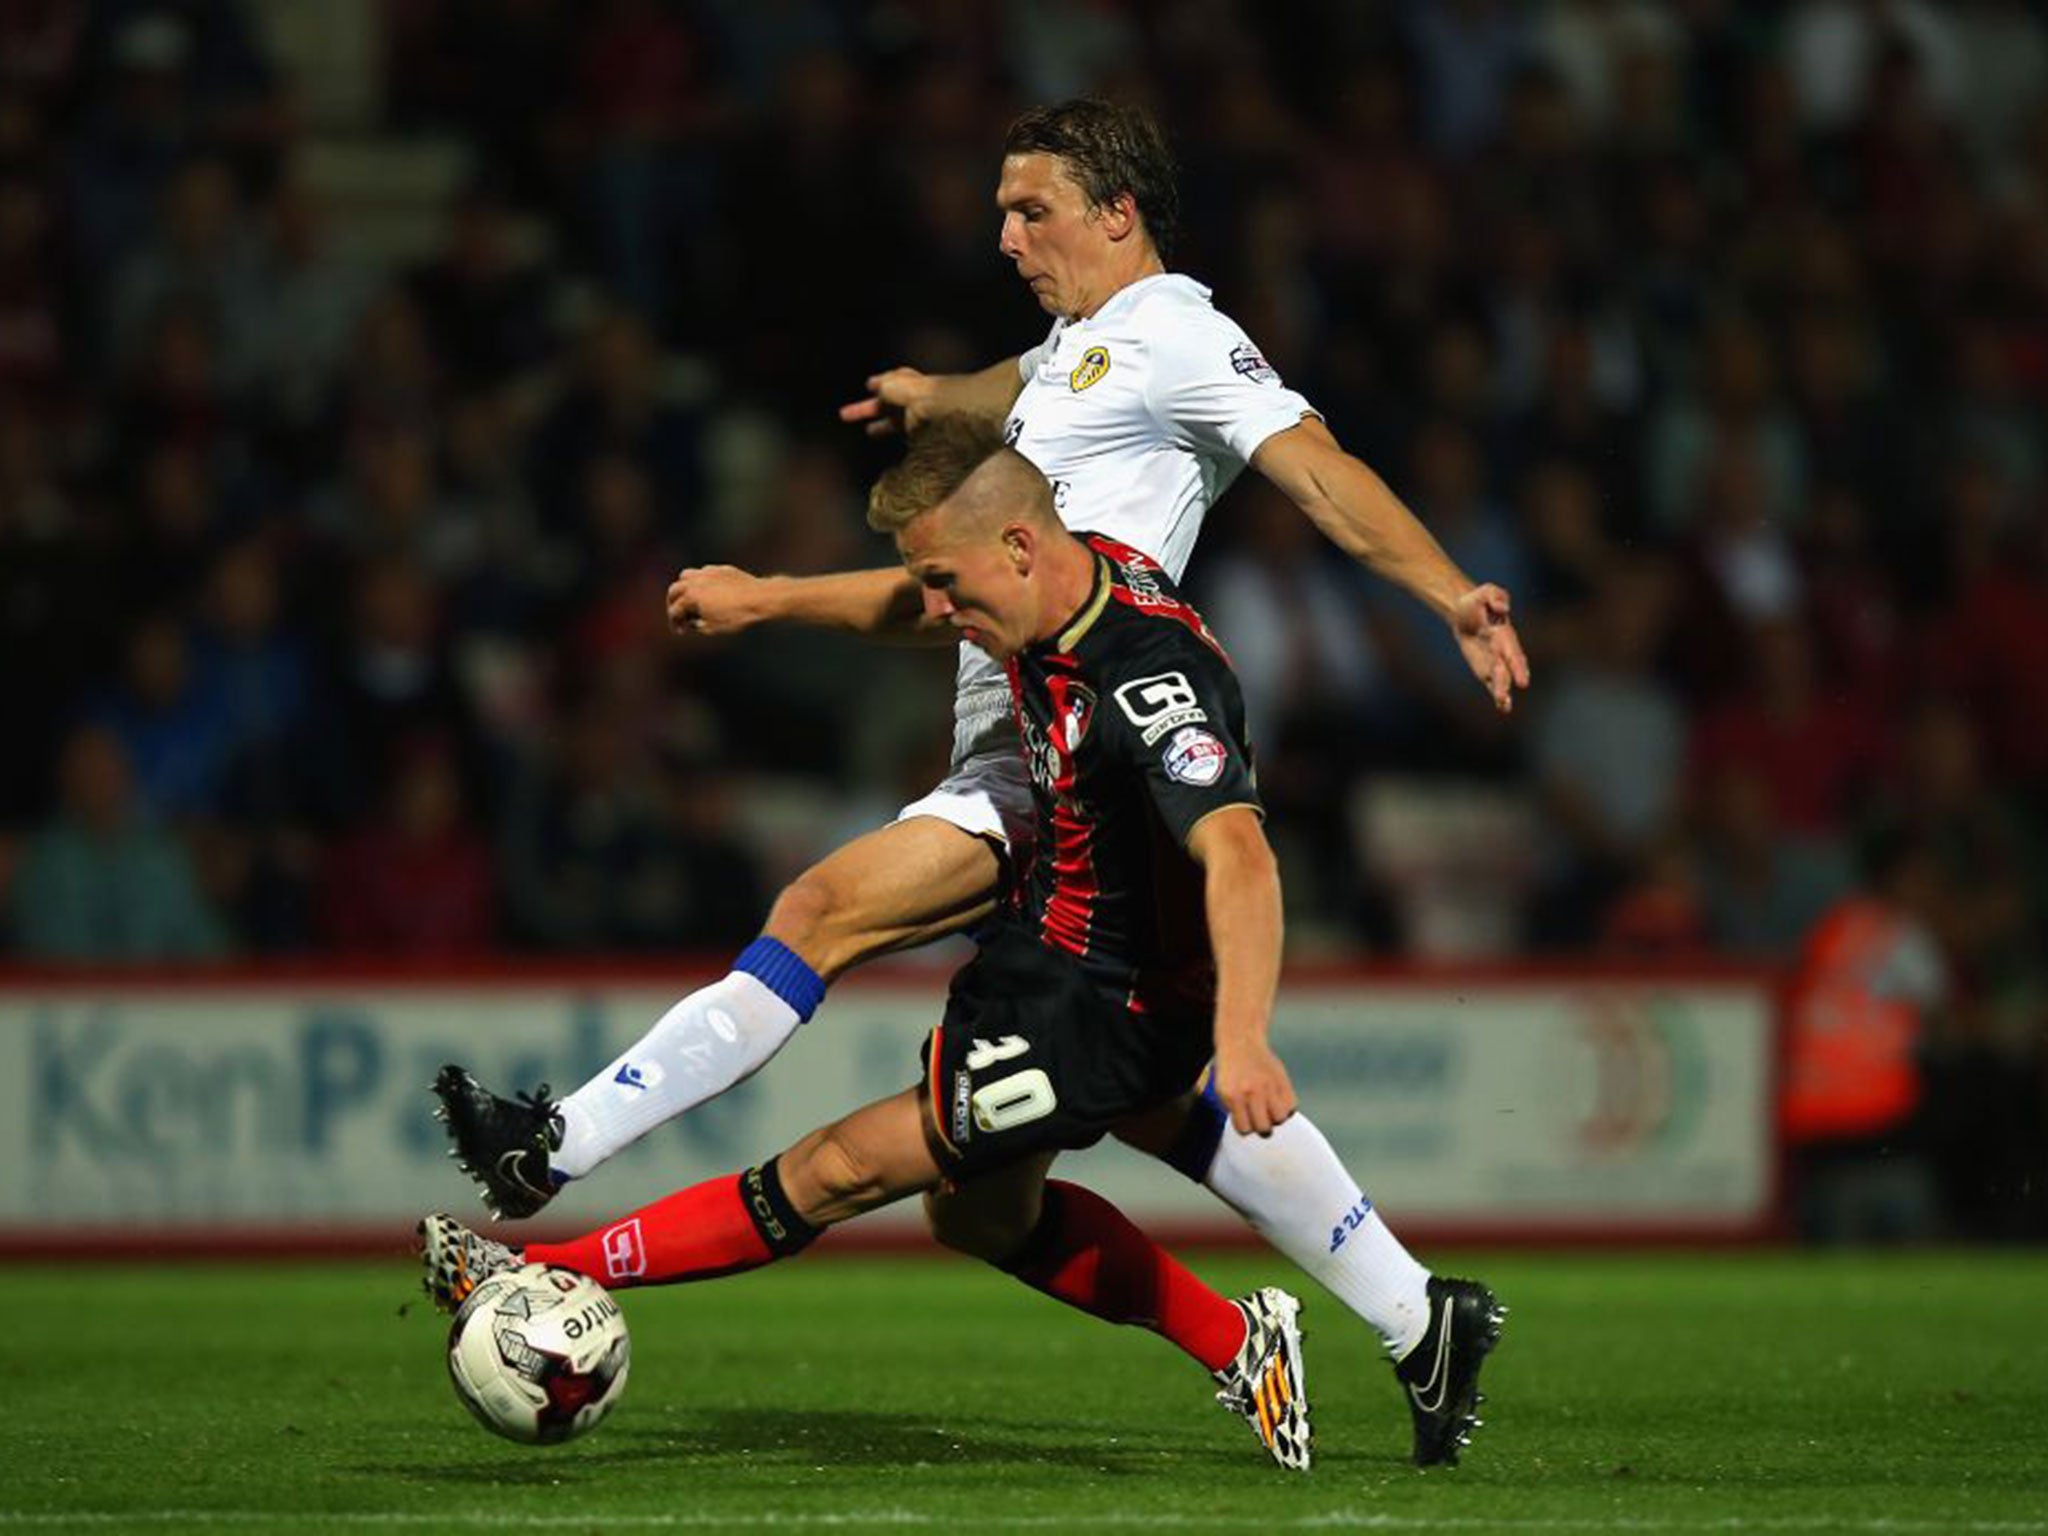 Matt Ritchie of Bournemouth, front, and Stephen Warnock of Leeds United challenge for the ball at the Goldsands Stadium on Tuesday night